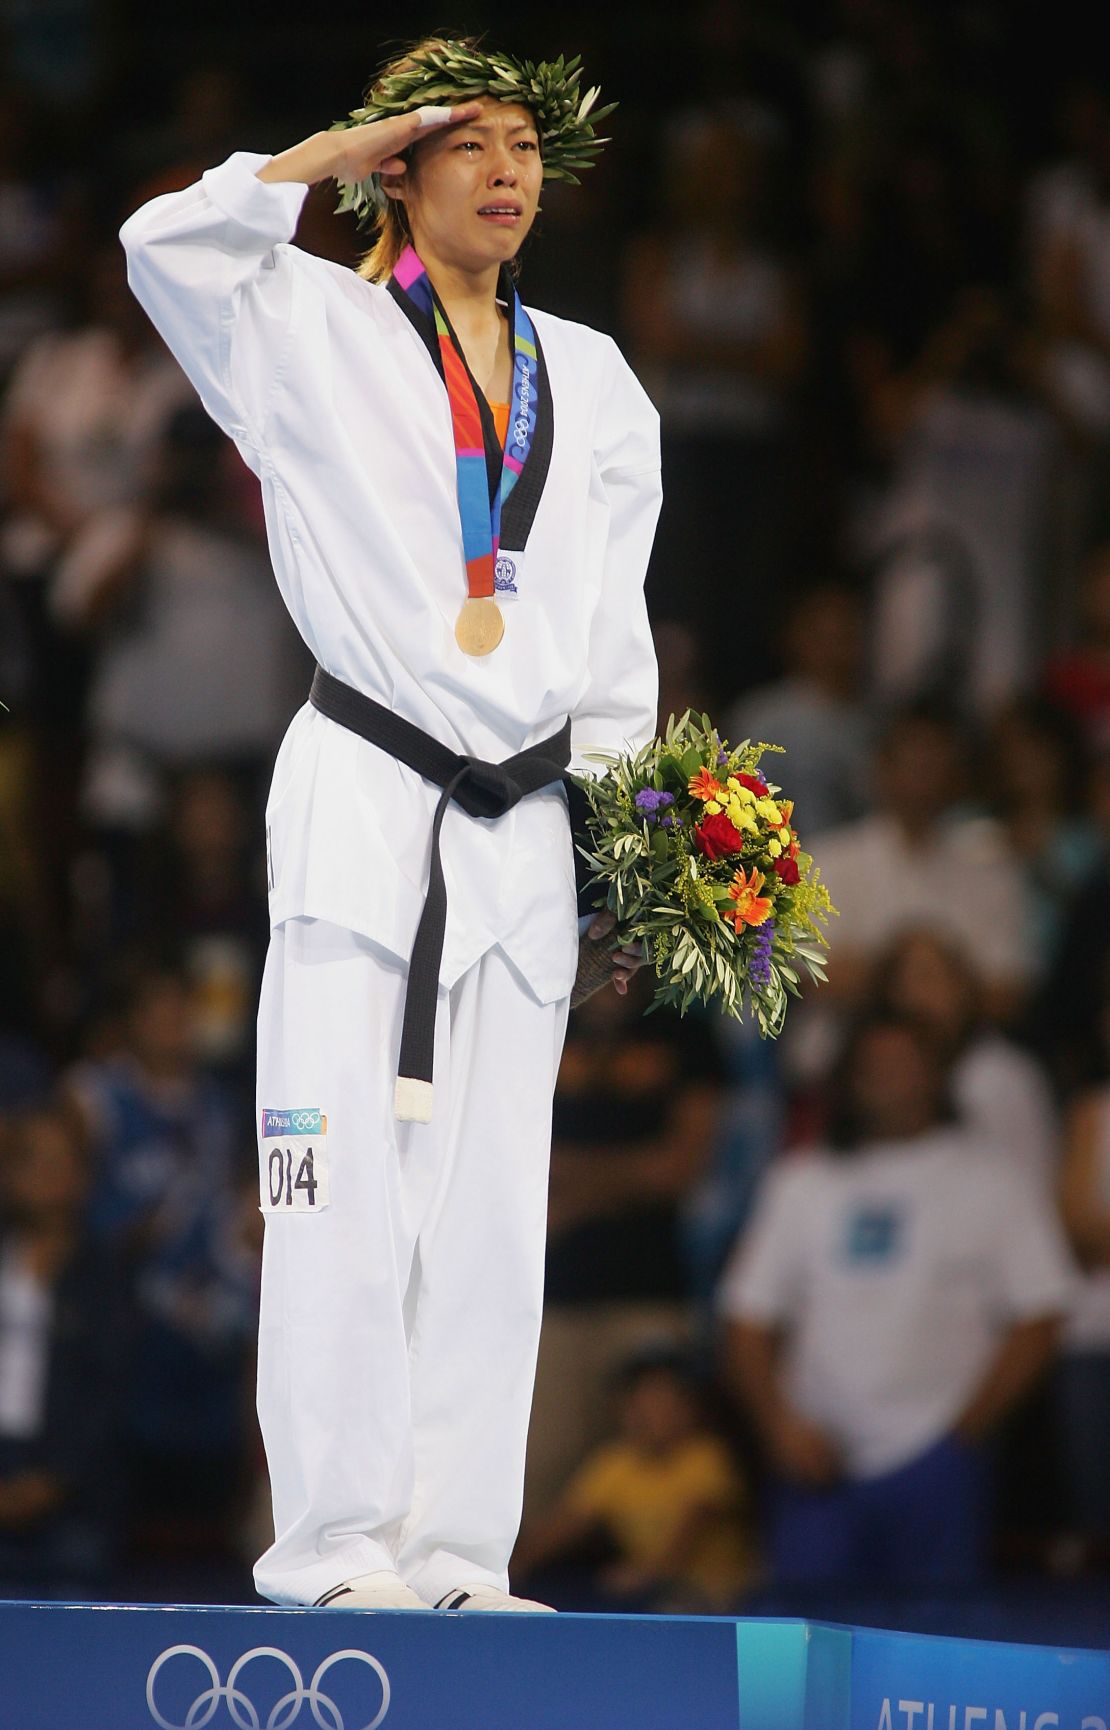 Chen Shih-hsin was the first ever Taiwanese athlete to win Olympic gold. 